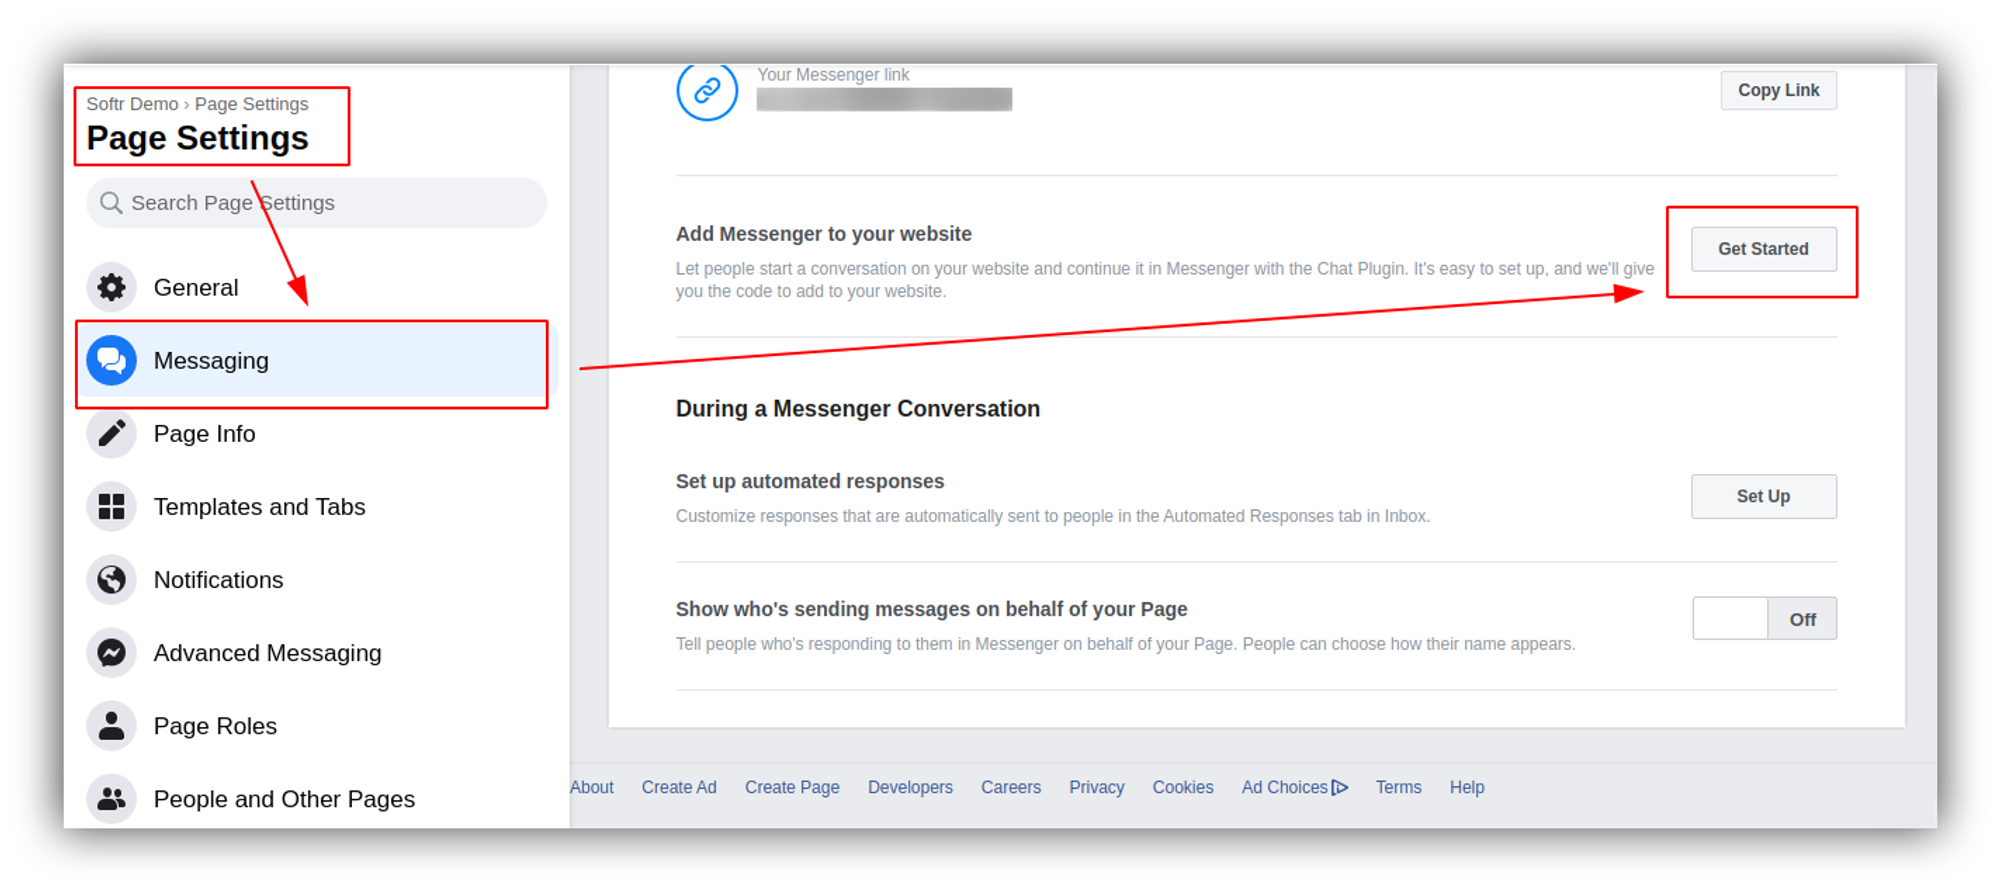 Add Messenger to your website